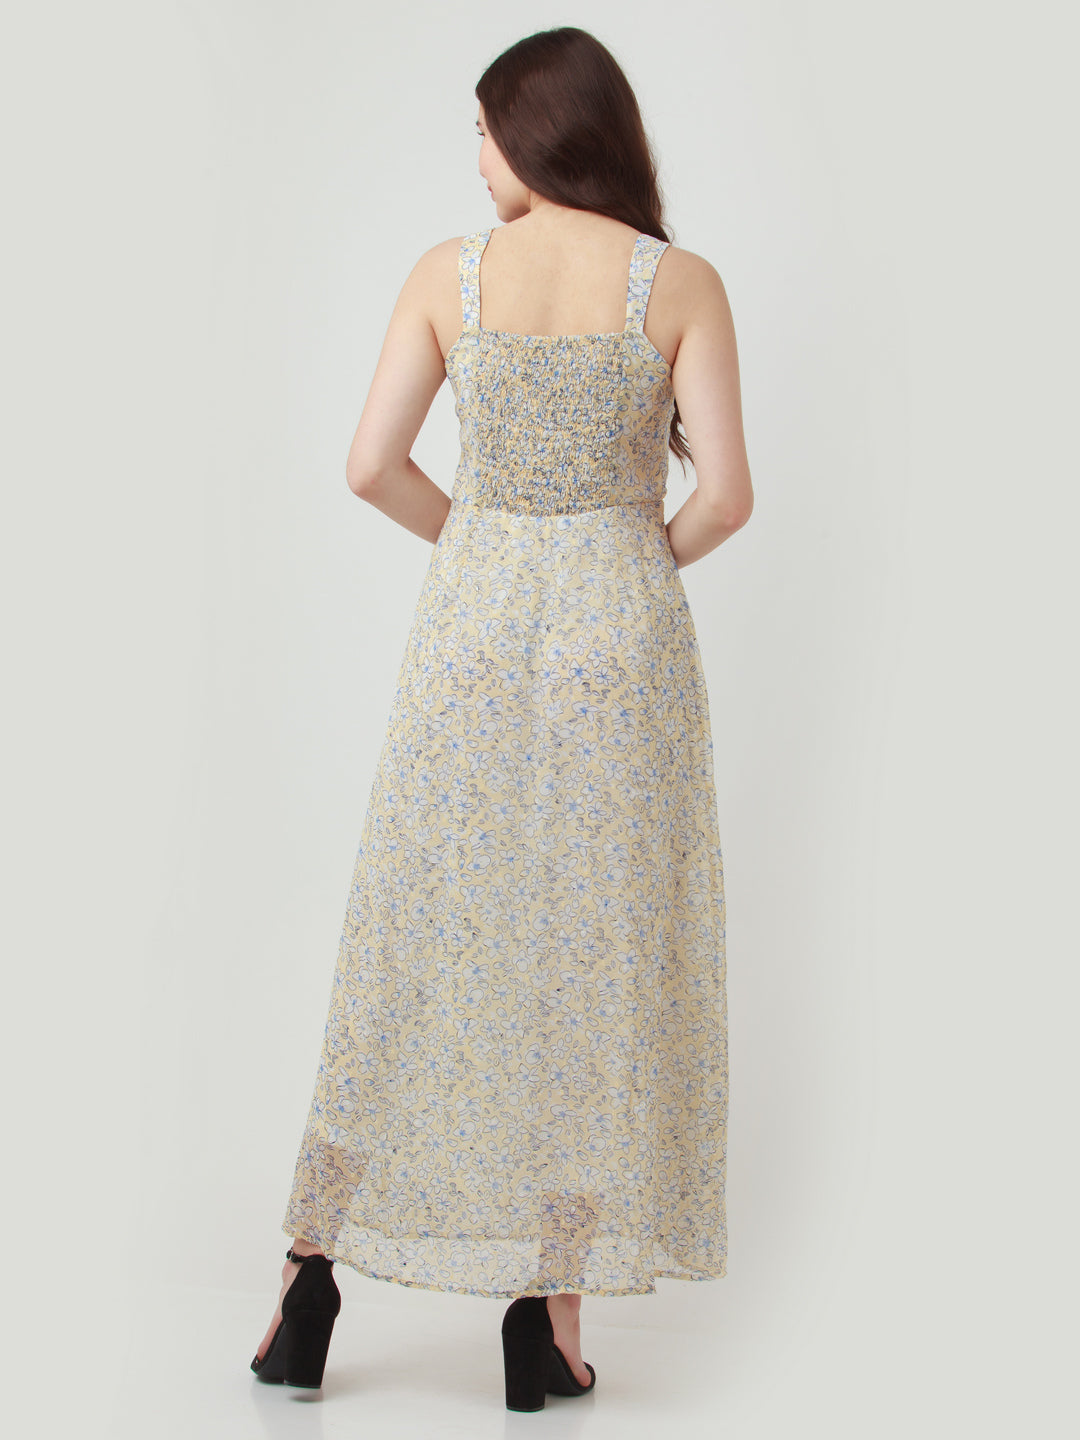 Yellow Printed Elasticated Maxi Dress For Women